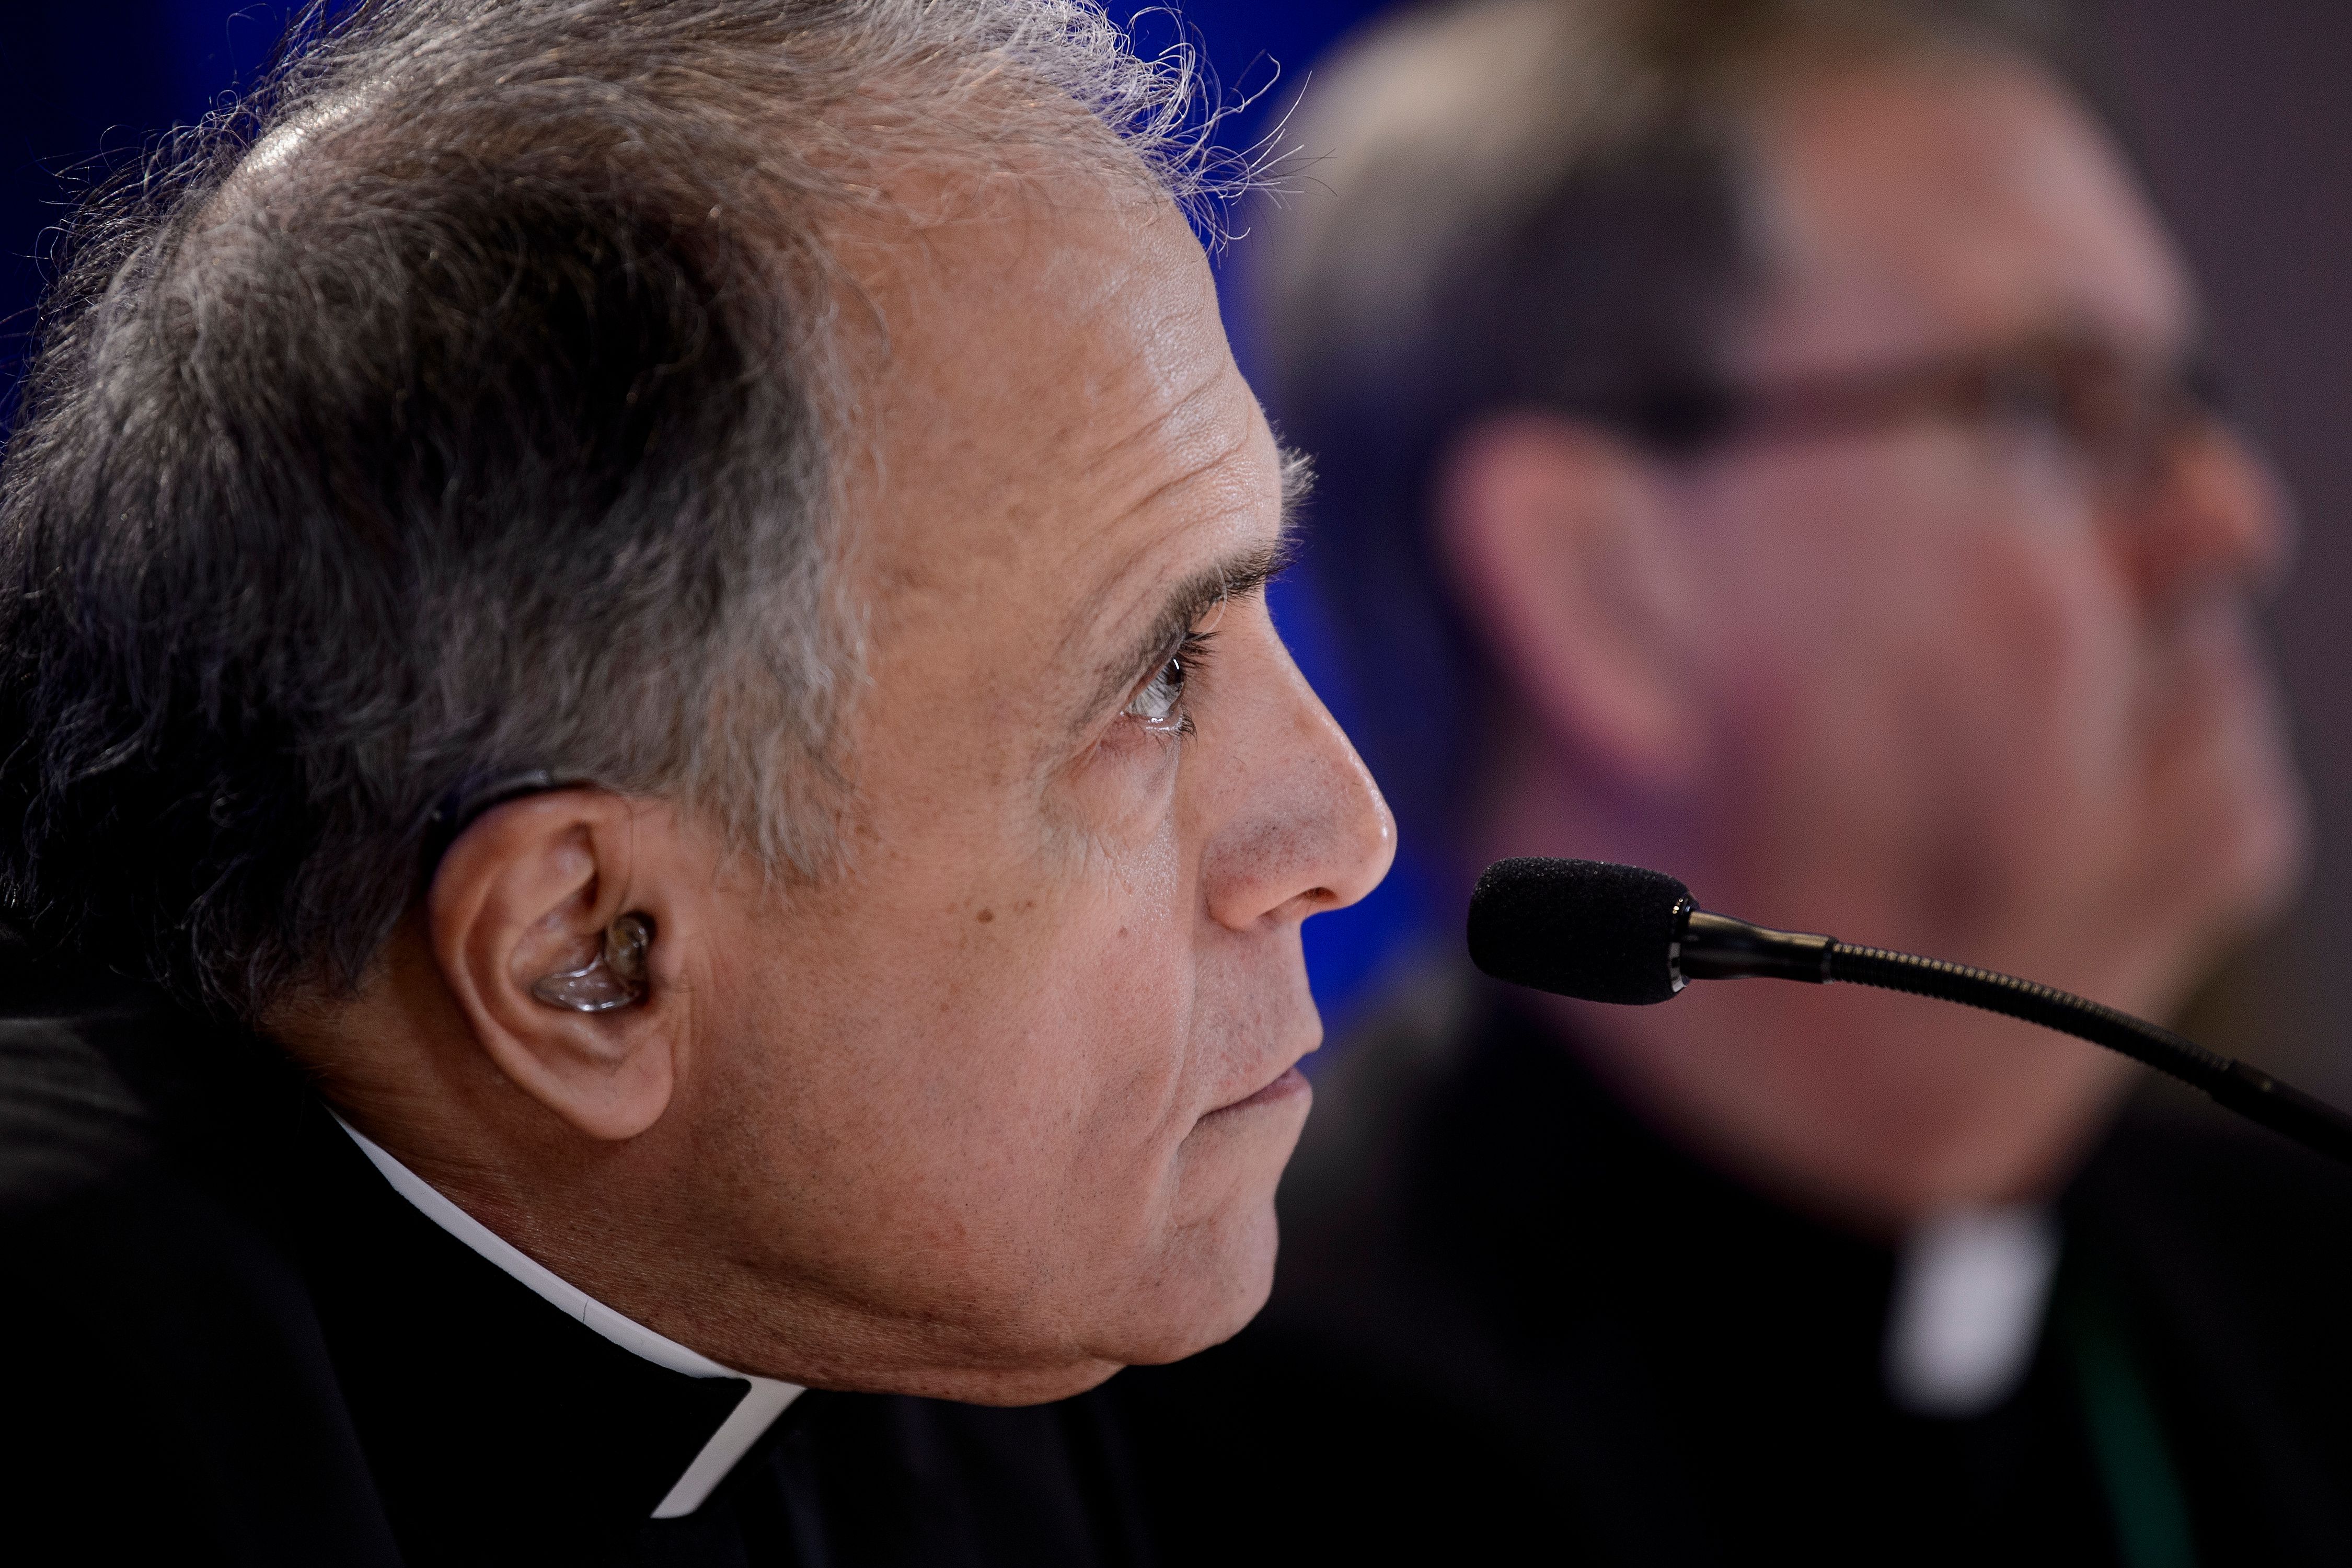 Galveston-Houston Cardinal Daniel DiNardo (L), President of the USCCB General Assembly, and Indiana Bishop Timothy Doherty, chairman of the committee for the Protection of Children and Young People, listen during a press conference at the annual US Conference of Catholic Bishops November 12, 2018 in Baltimore, Maryland. (BRENDAN SMIALOWSKI/AFP/Getty Images)